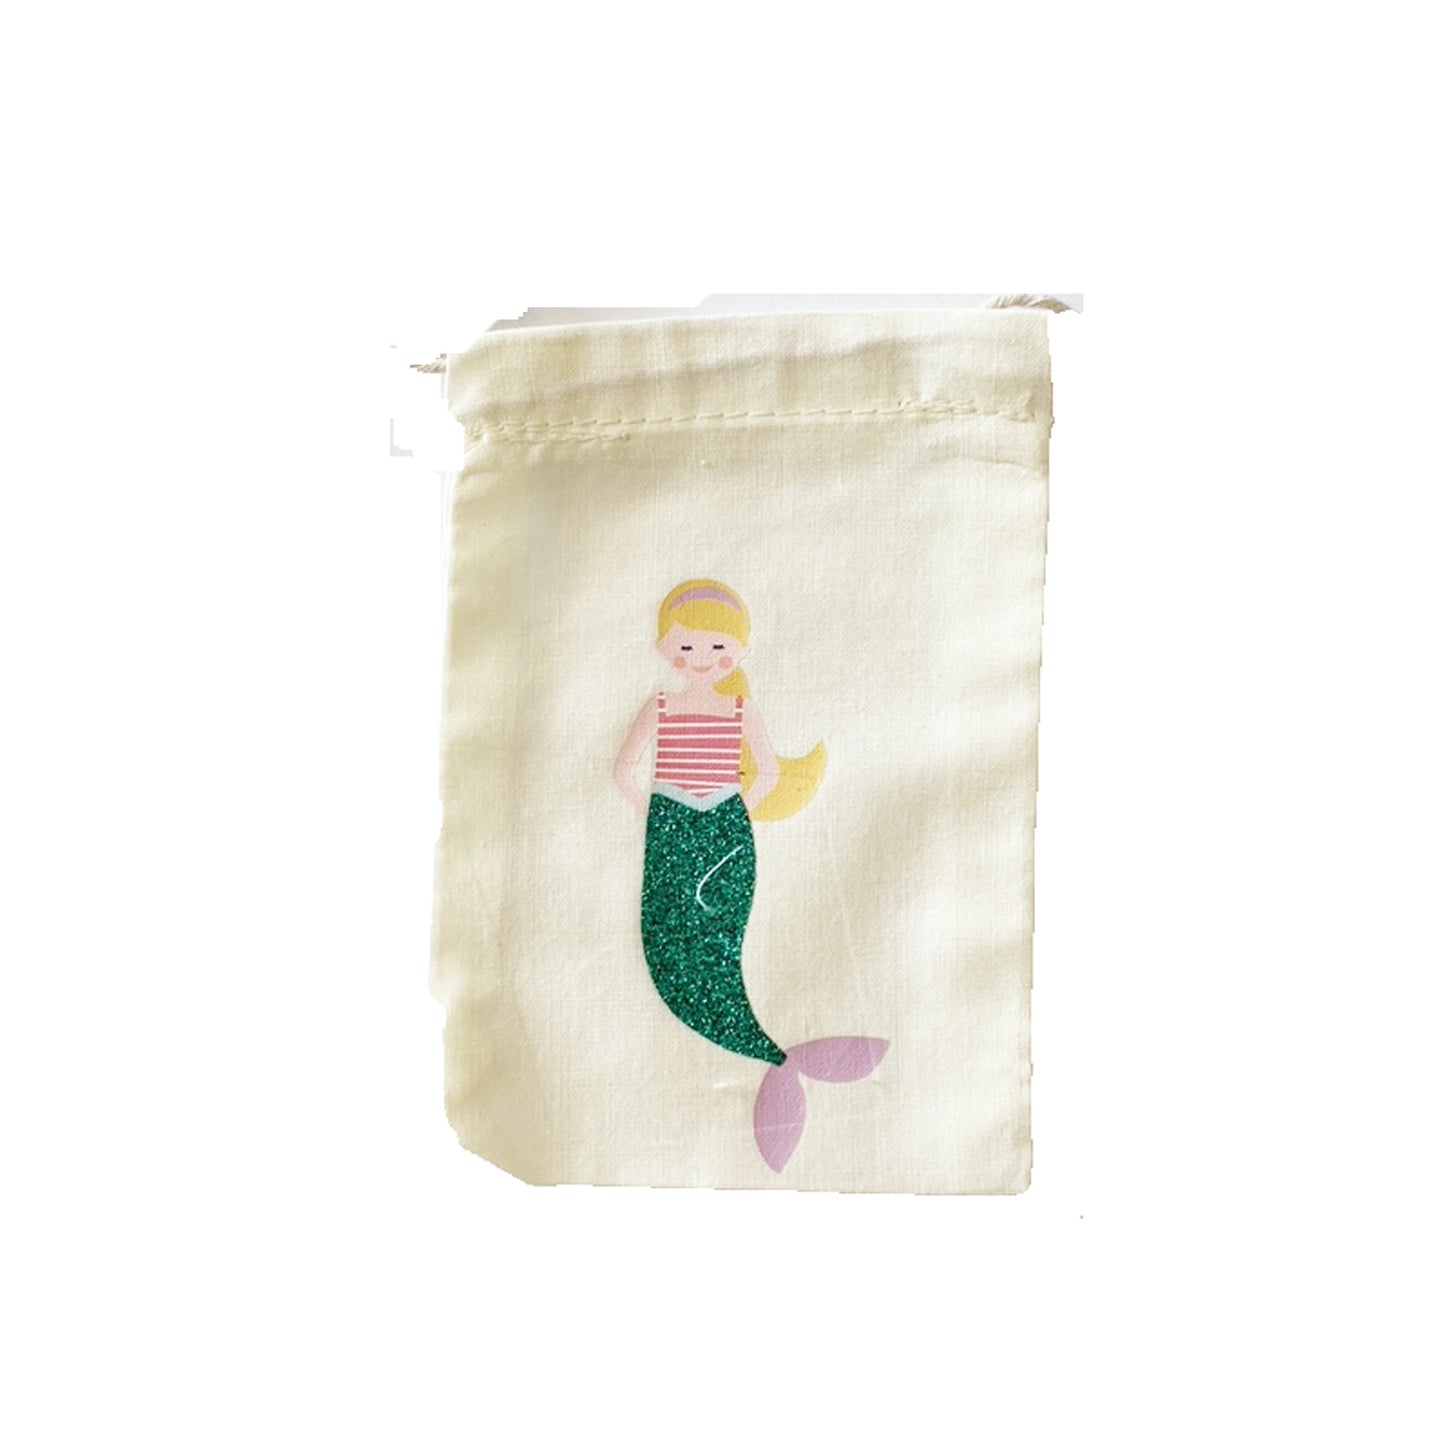 Calico Party Favour Bag - Mermaid